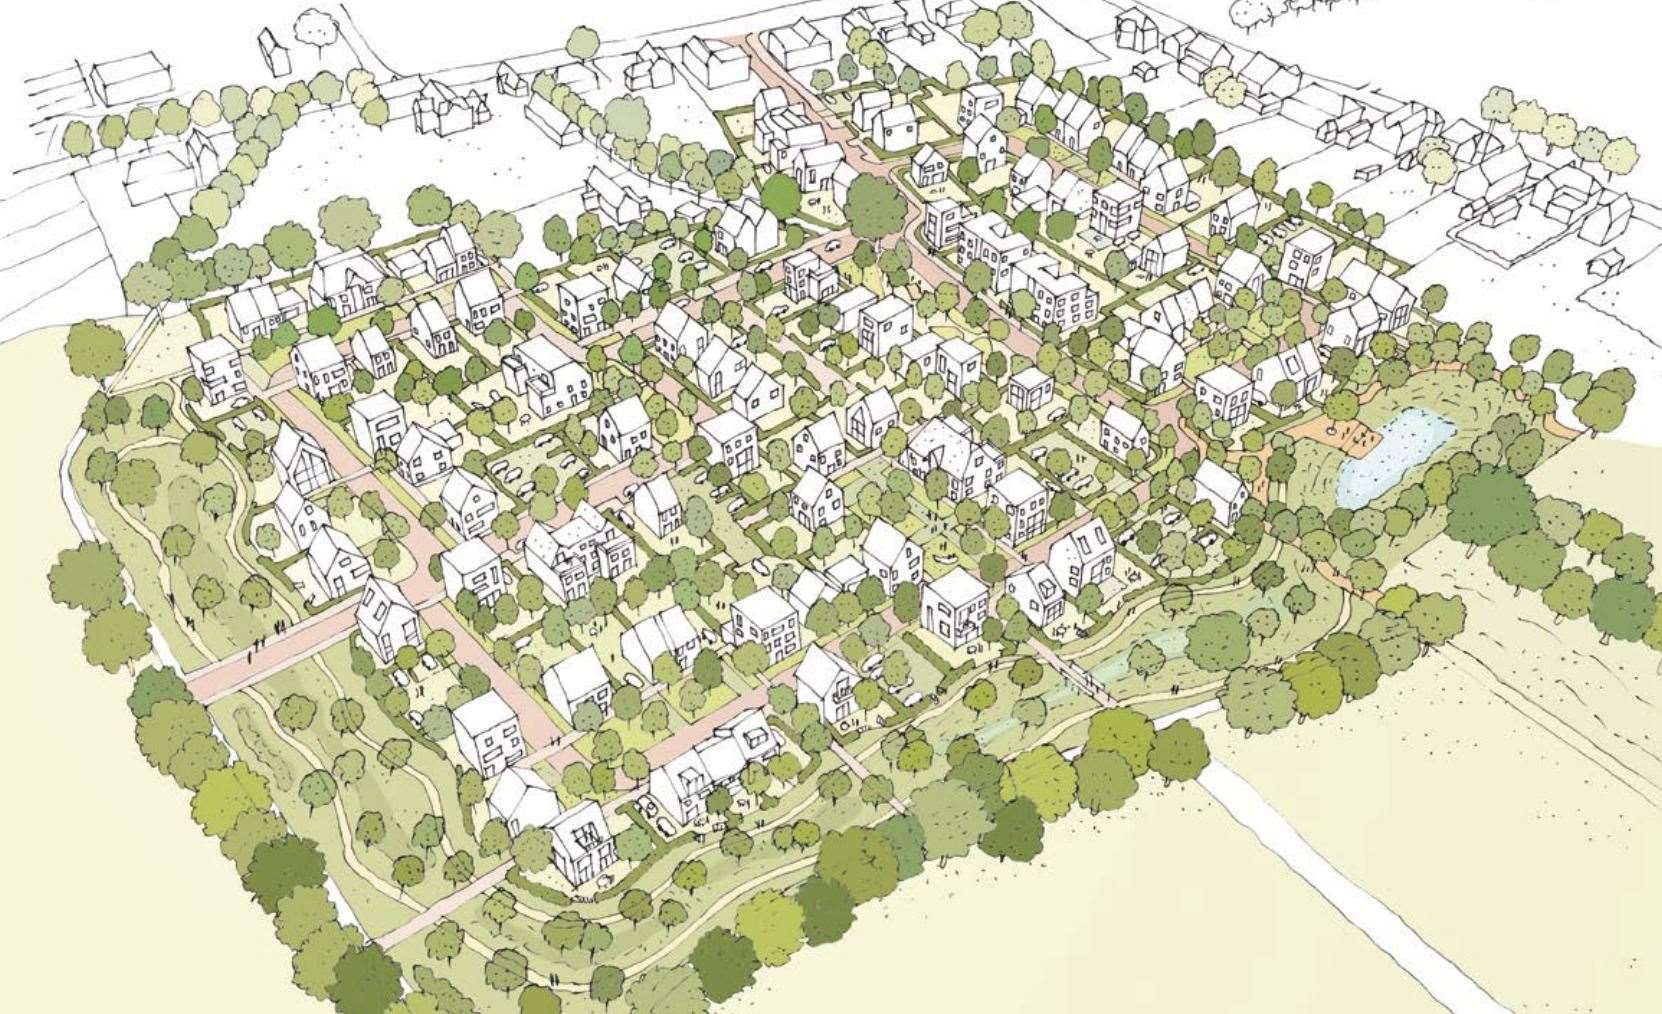 How Orchard farm will look once all 122 homes are built. Picture: Steenvlinder and Urbanise